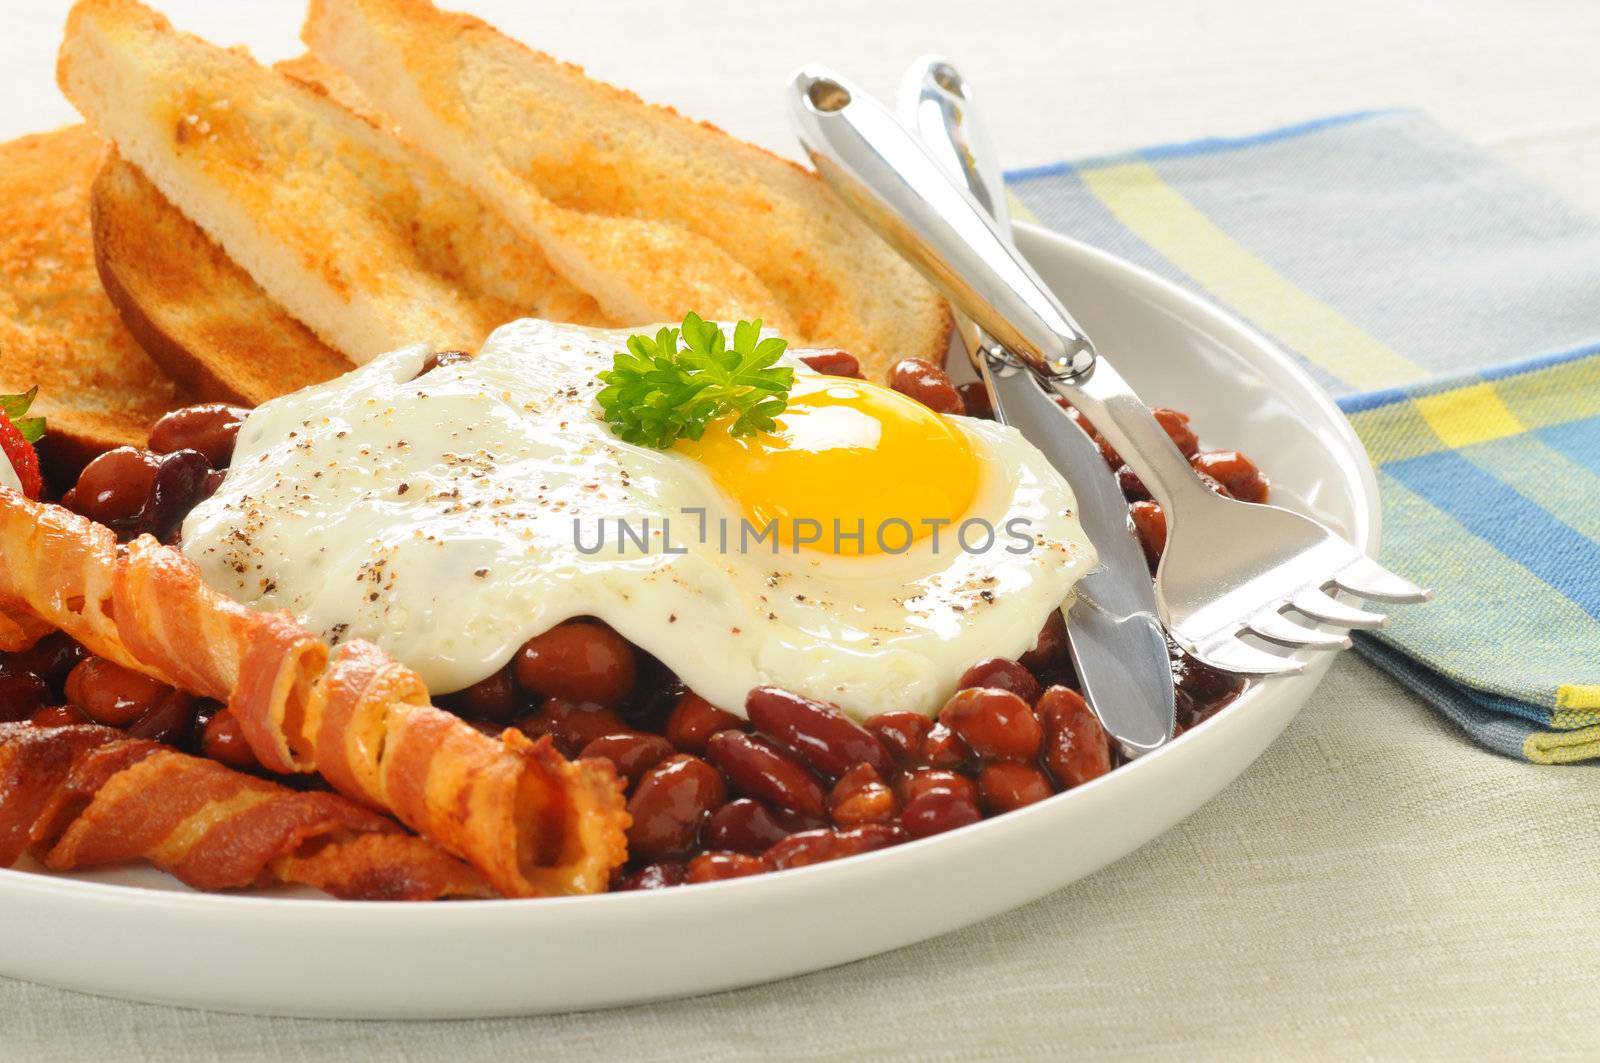 Fried egg with bacon, toast and beans.